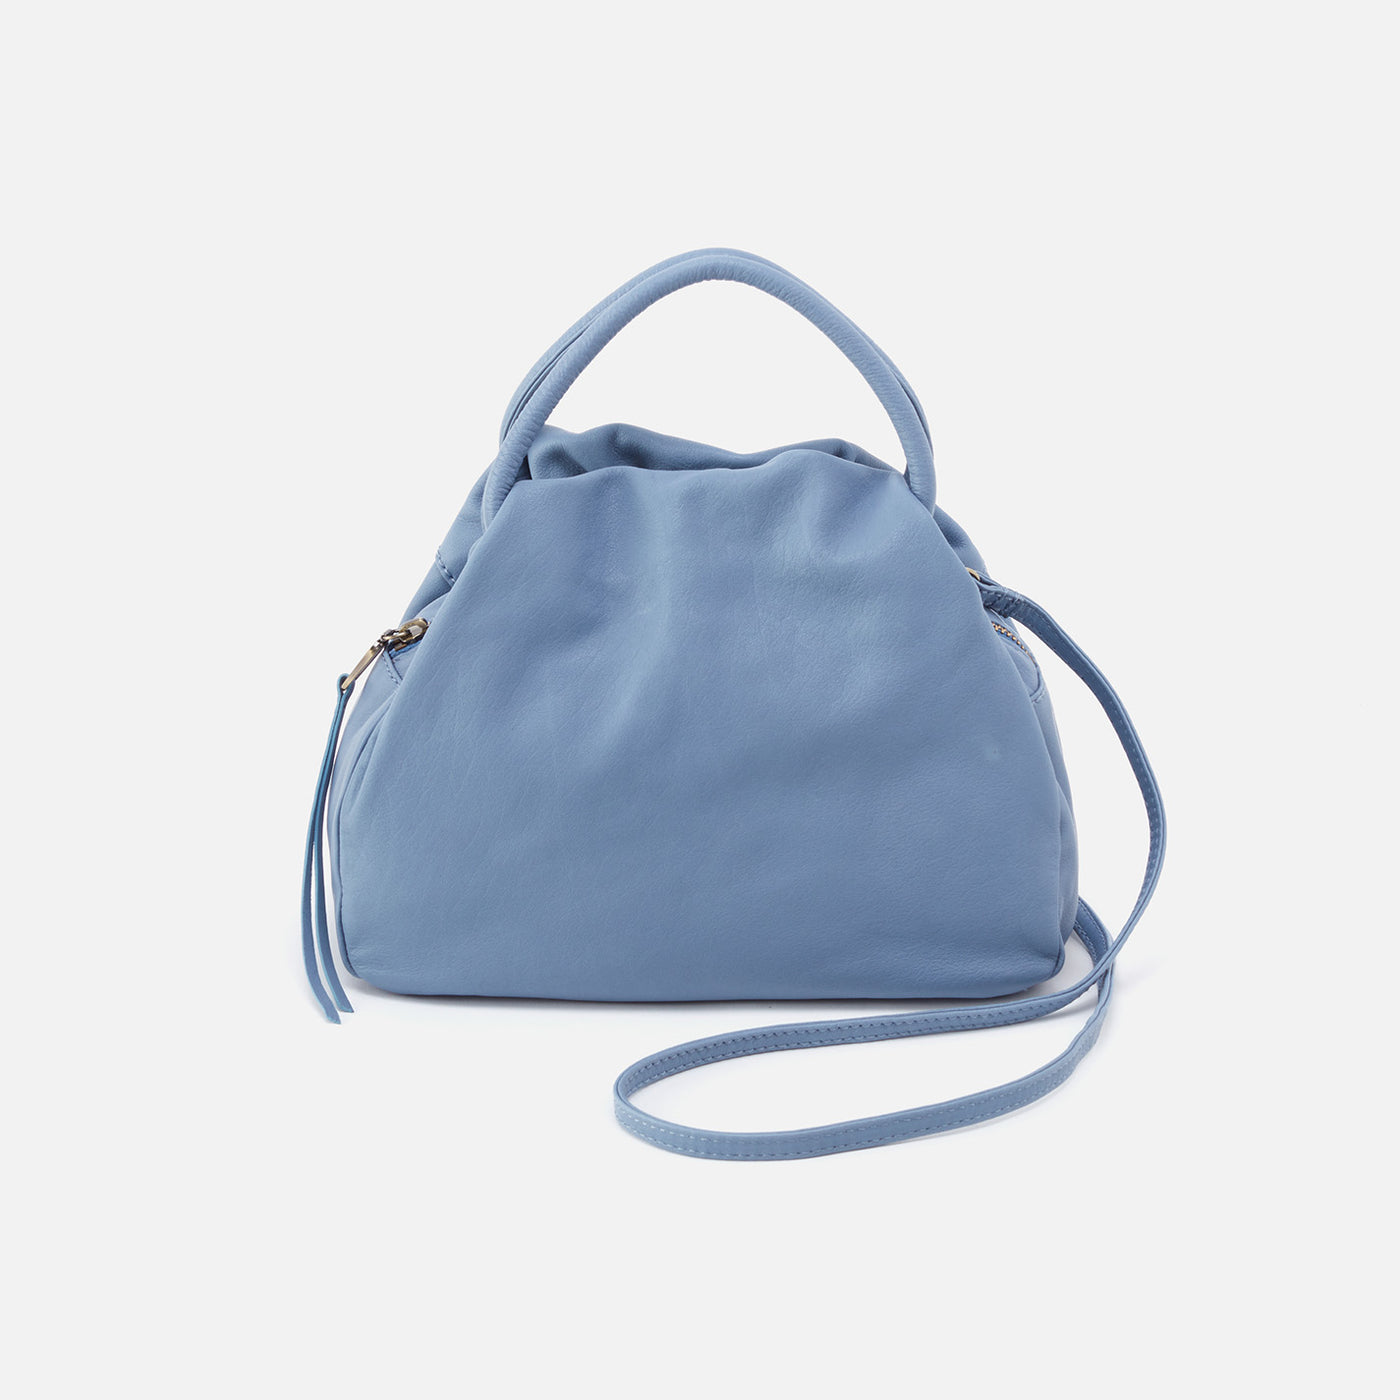 Darling Small Satchel in Soft Leather - Provence